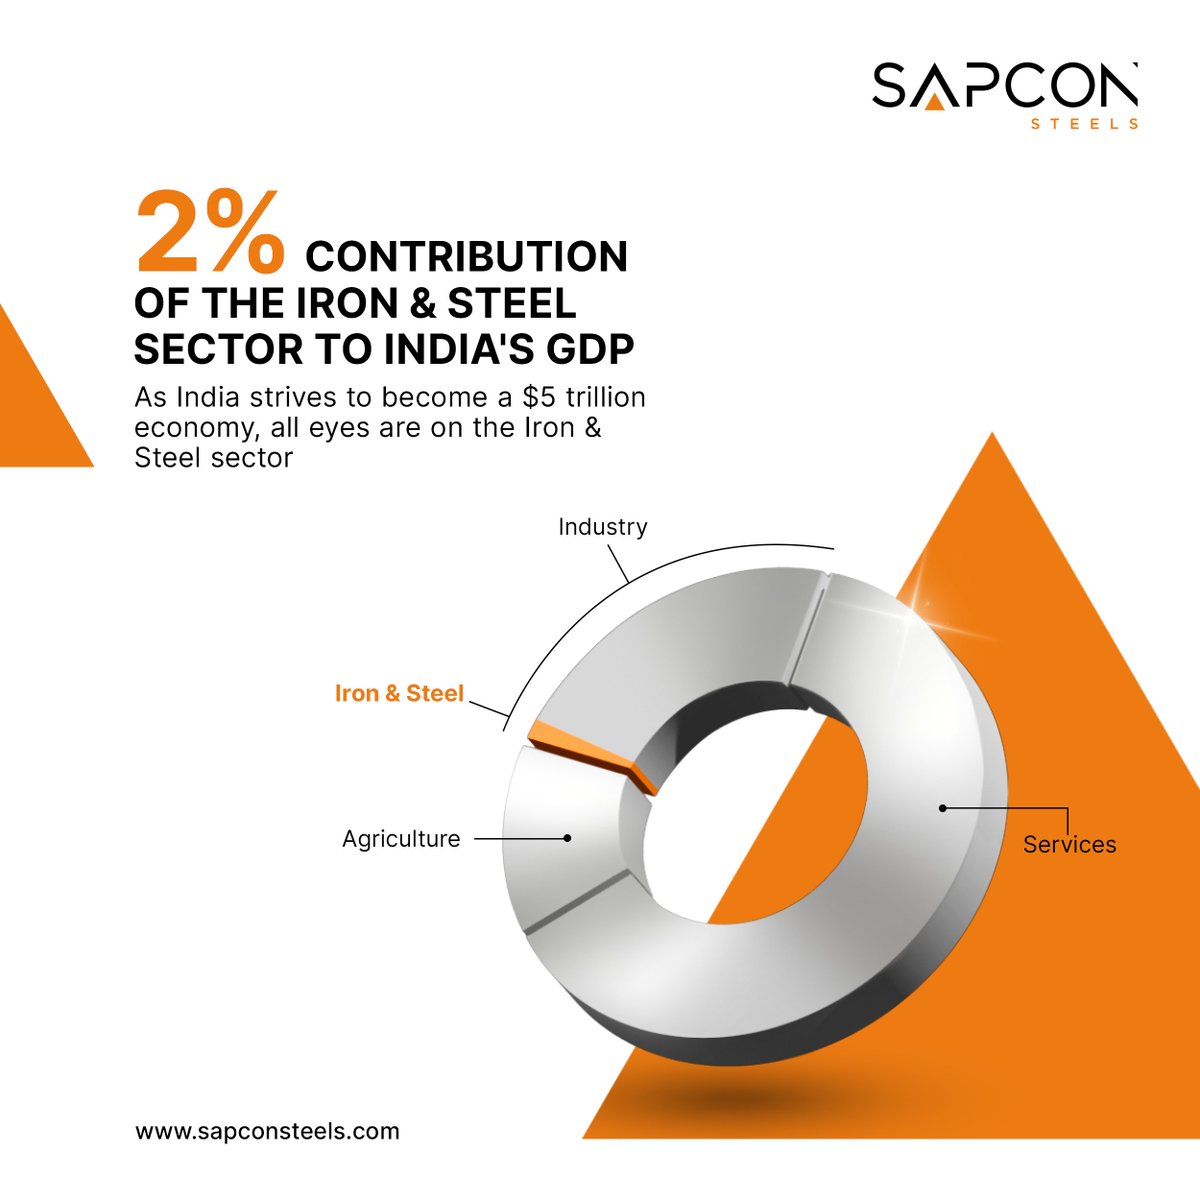 As India aims for a $5 trillion economy, the iron and steel industry emerges as a key player. Sapcon Steels is committed to fueling this growth, anticipating a bright future ahead.

#ironandsteelindustry #5trillioneconomy #gdpindia #gdpgrowth #SapconSteels #Sourcesmartersteels